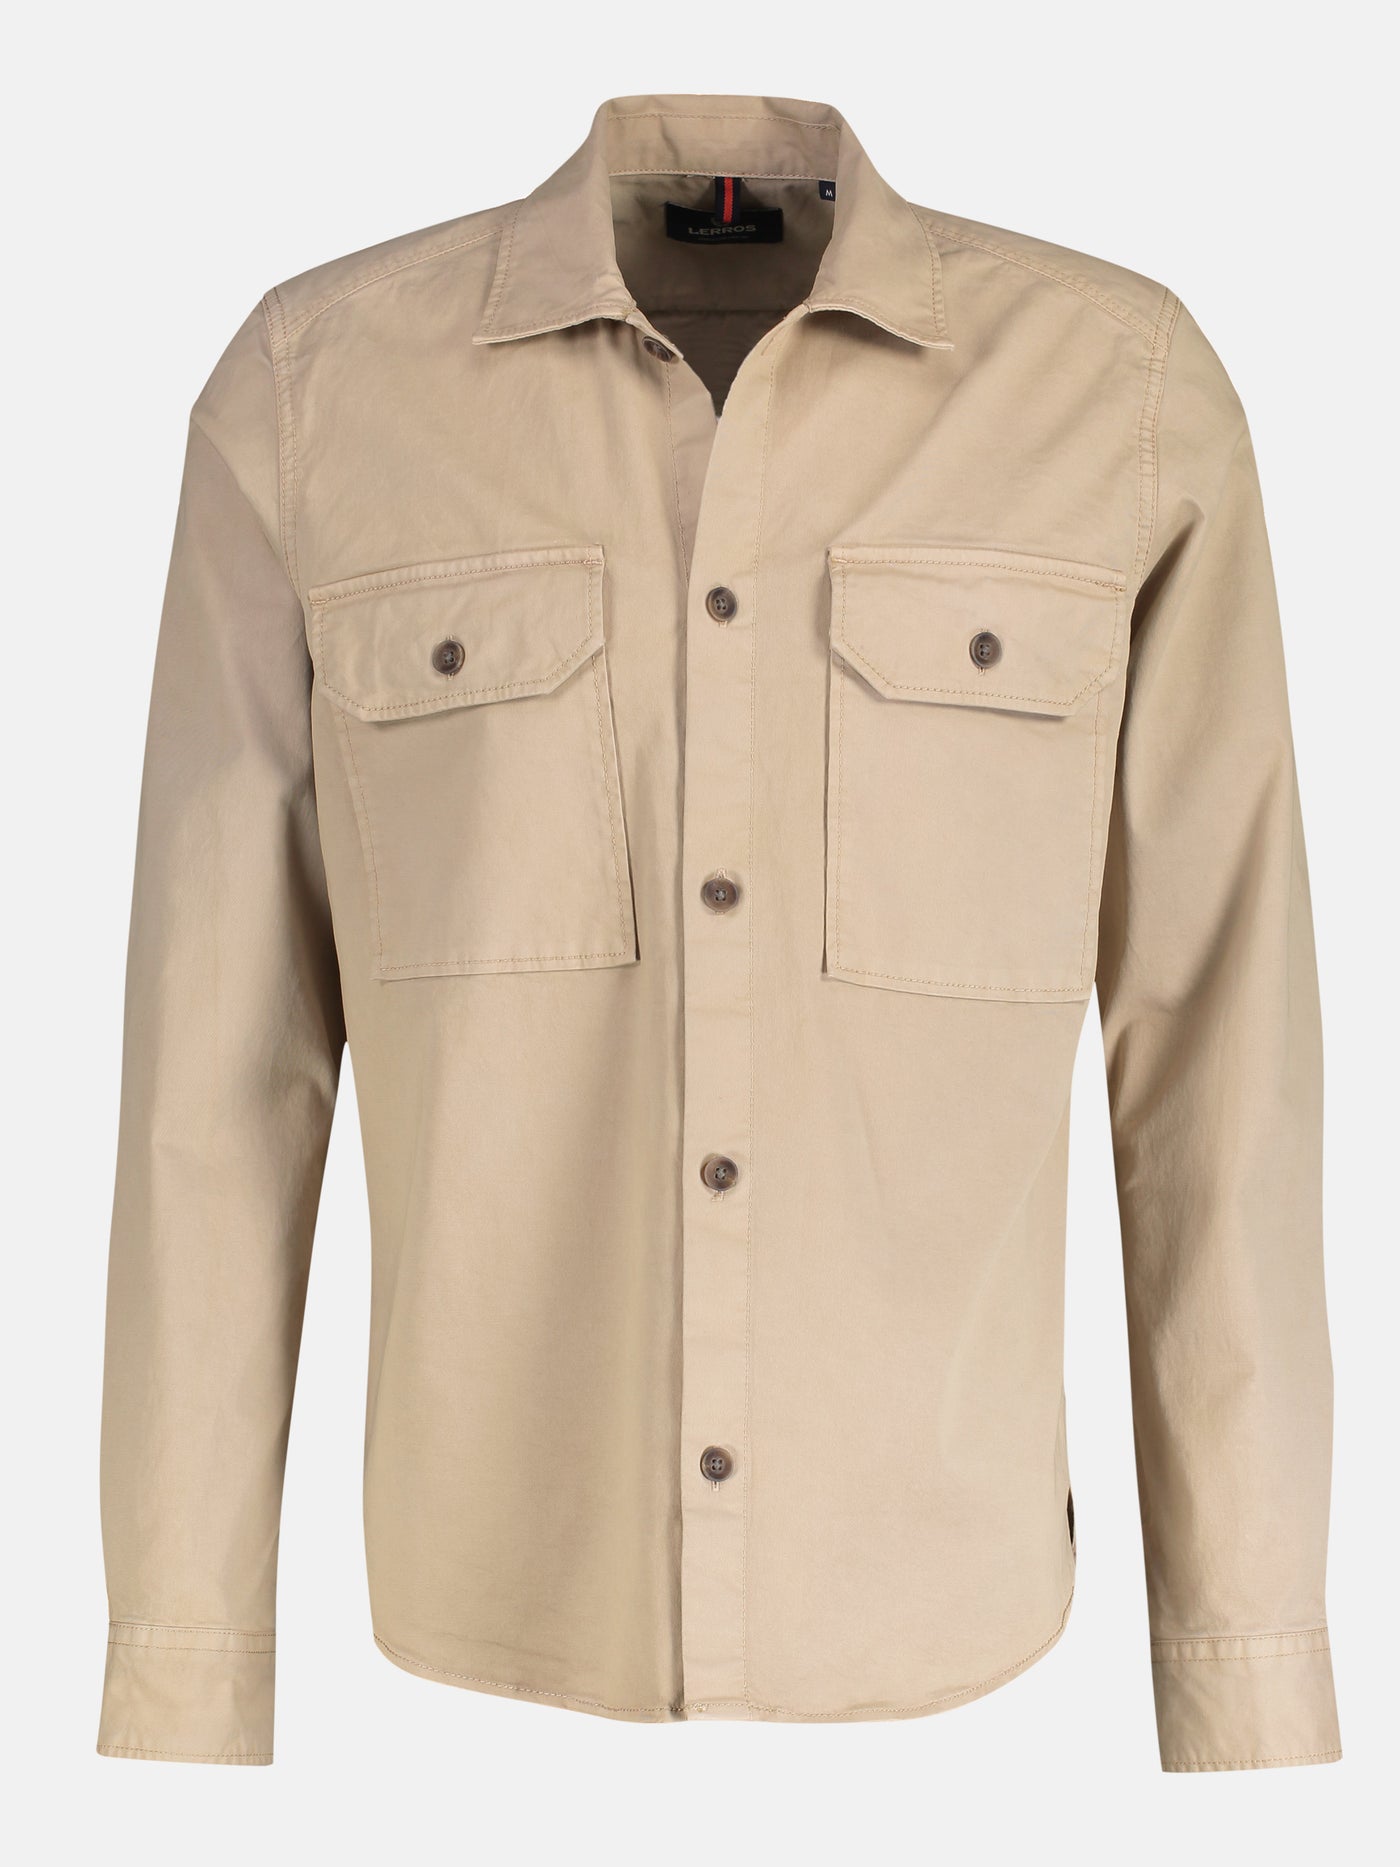 Outdoor shirt in robust twill quality